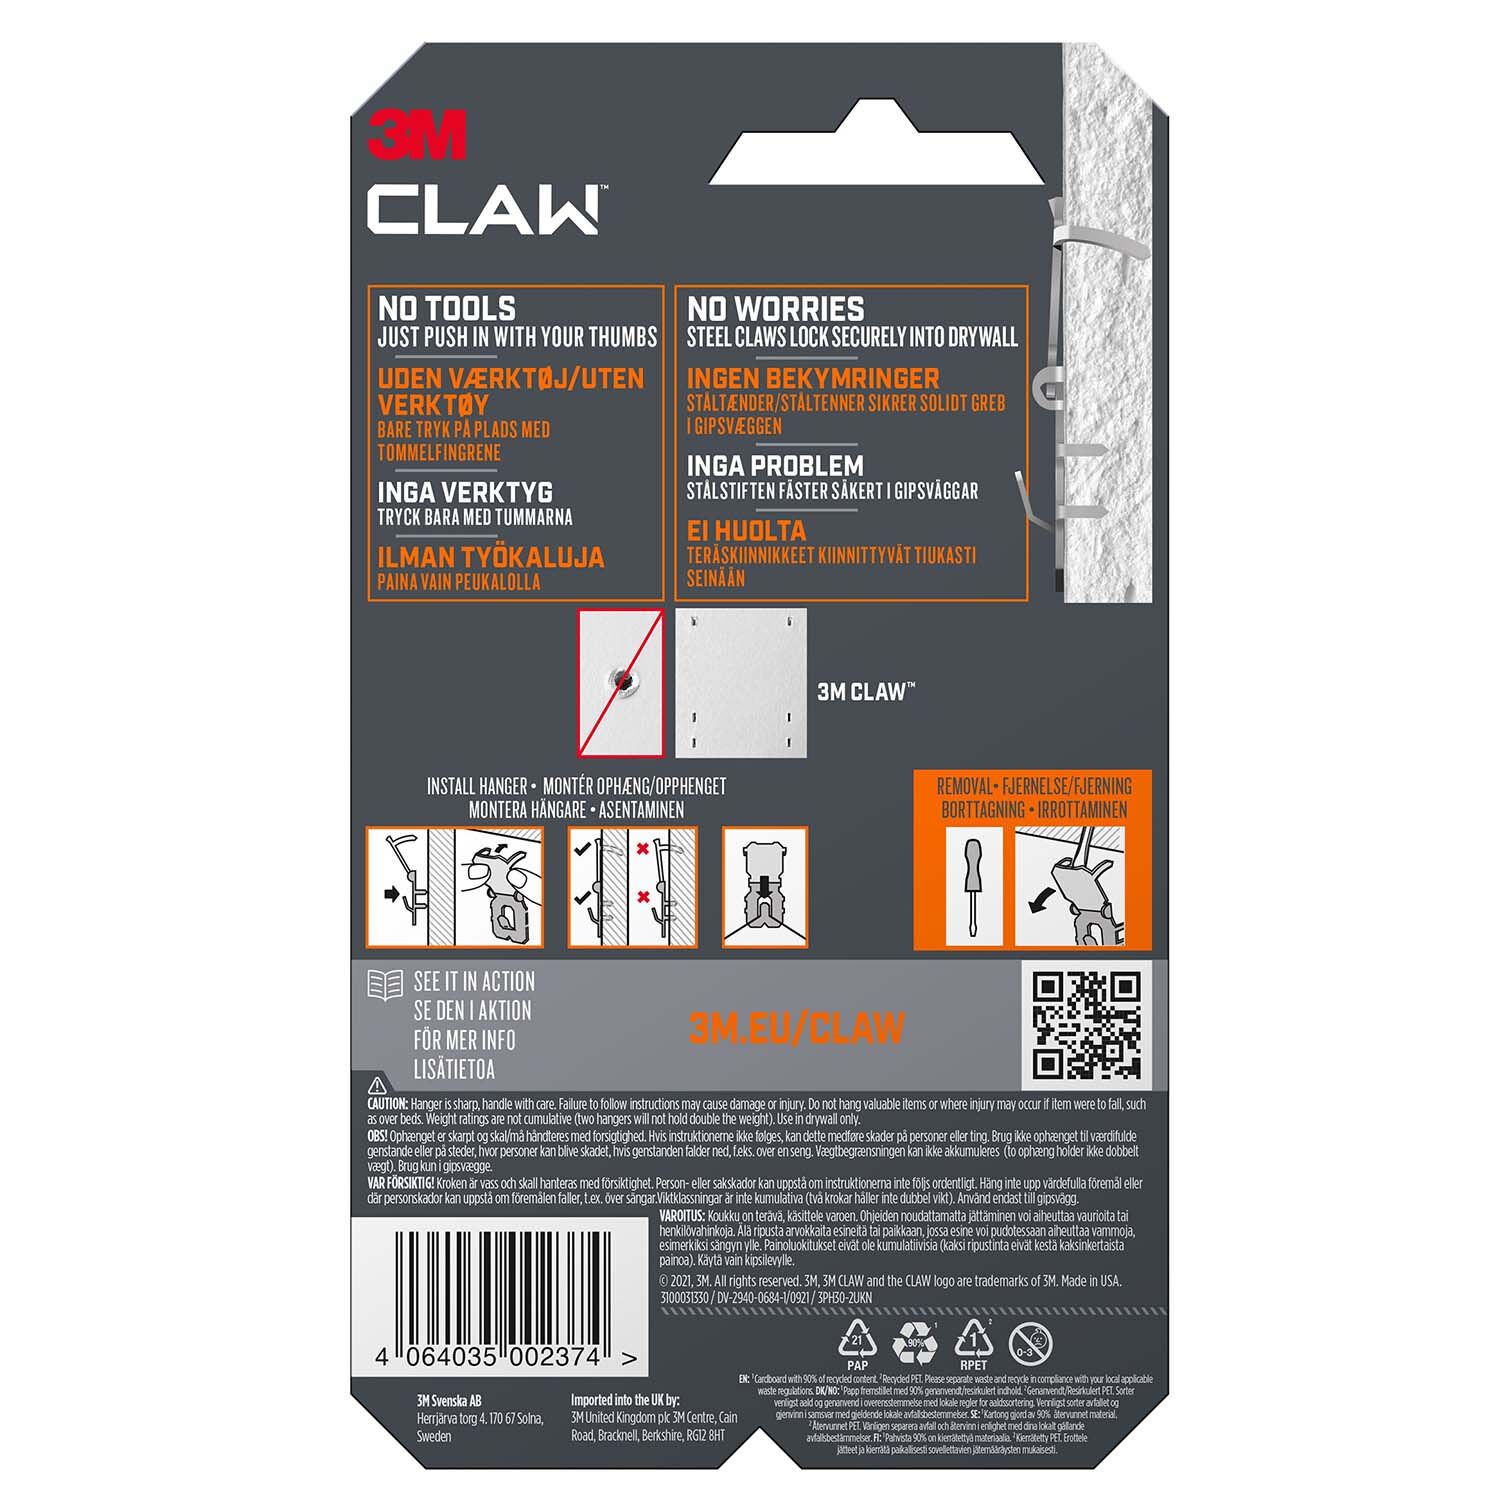 3M Claw Drywall Picture Hanger 30kg 2 Pack - Home Store + More